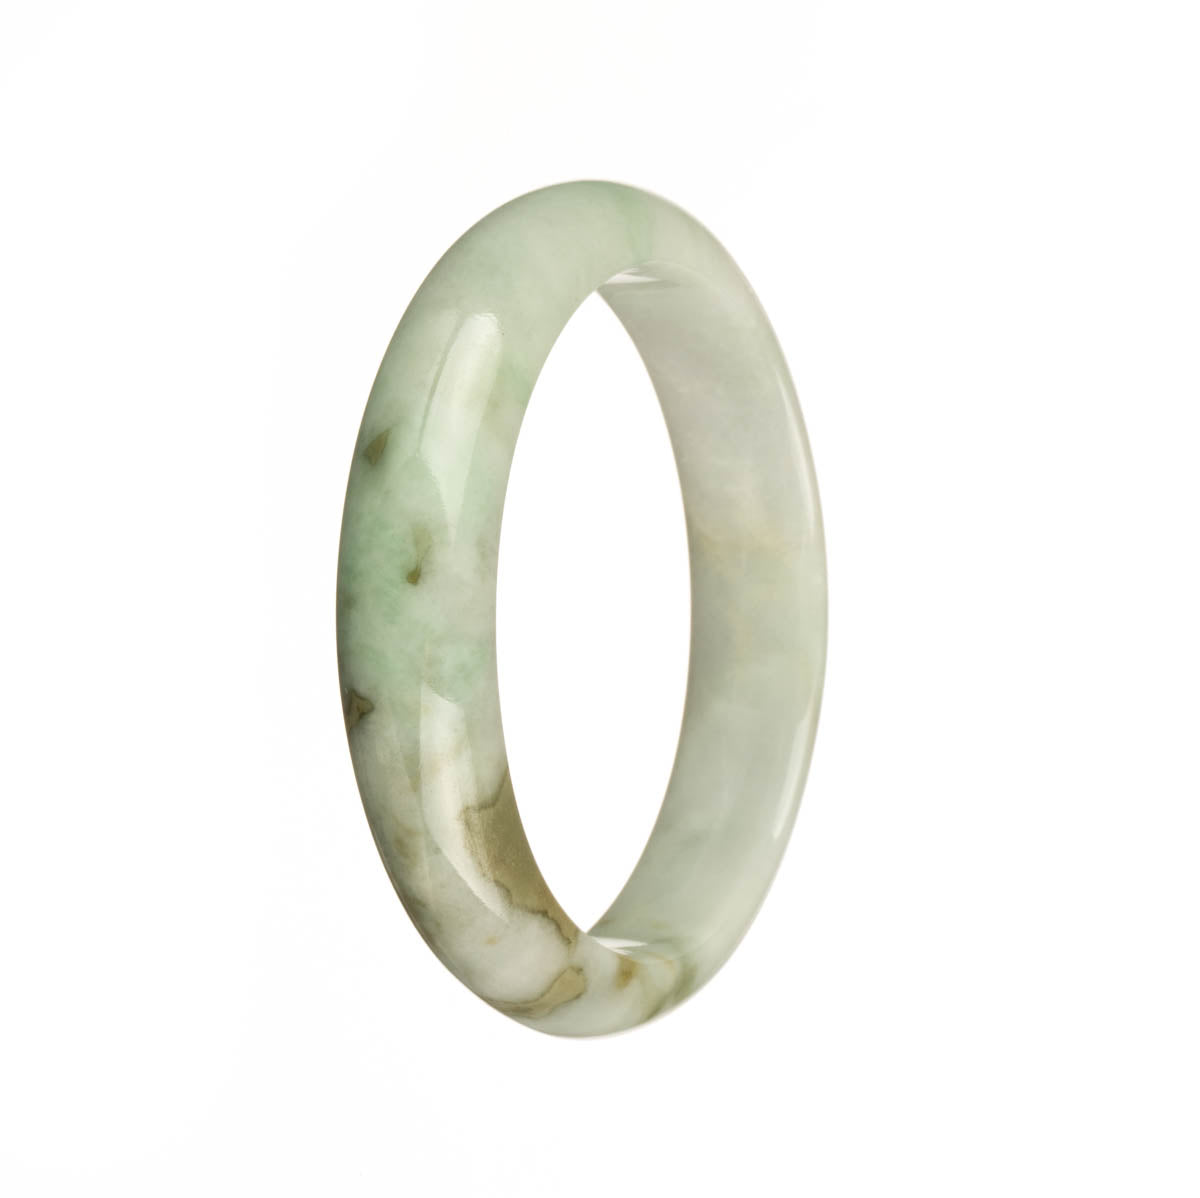 Real Untreated White with Green and Brown Patterns Jadeite Bracelet - 54mm Half Moon